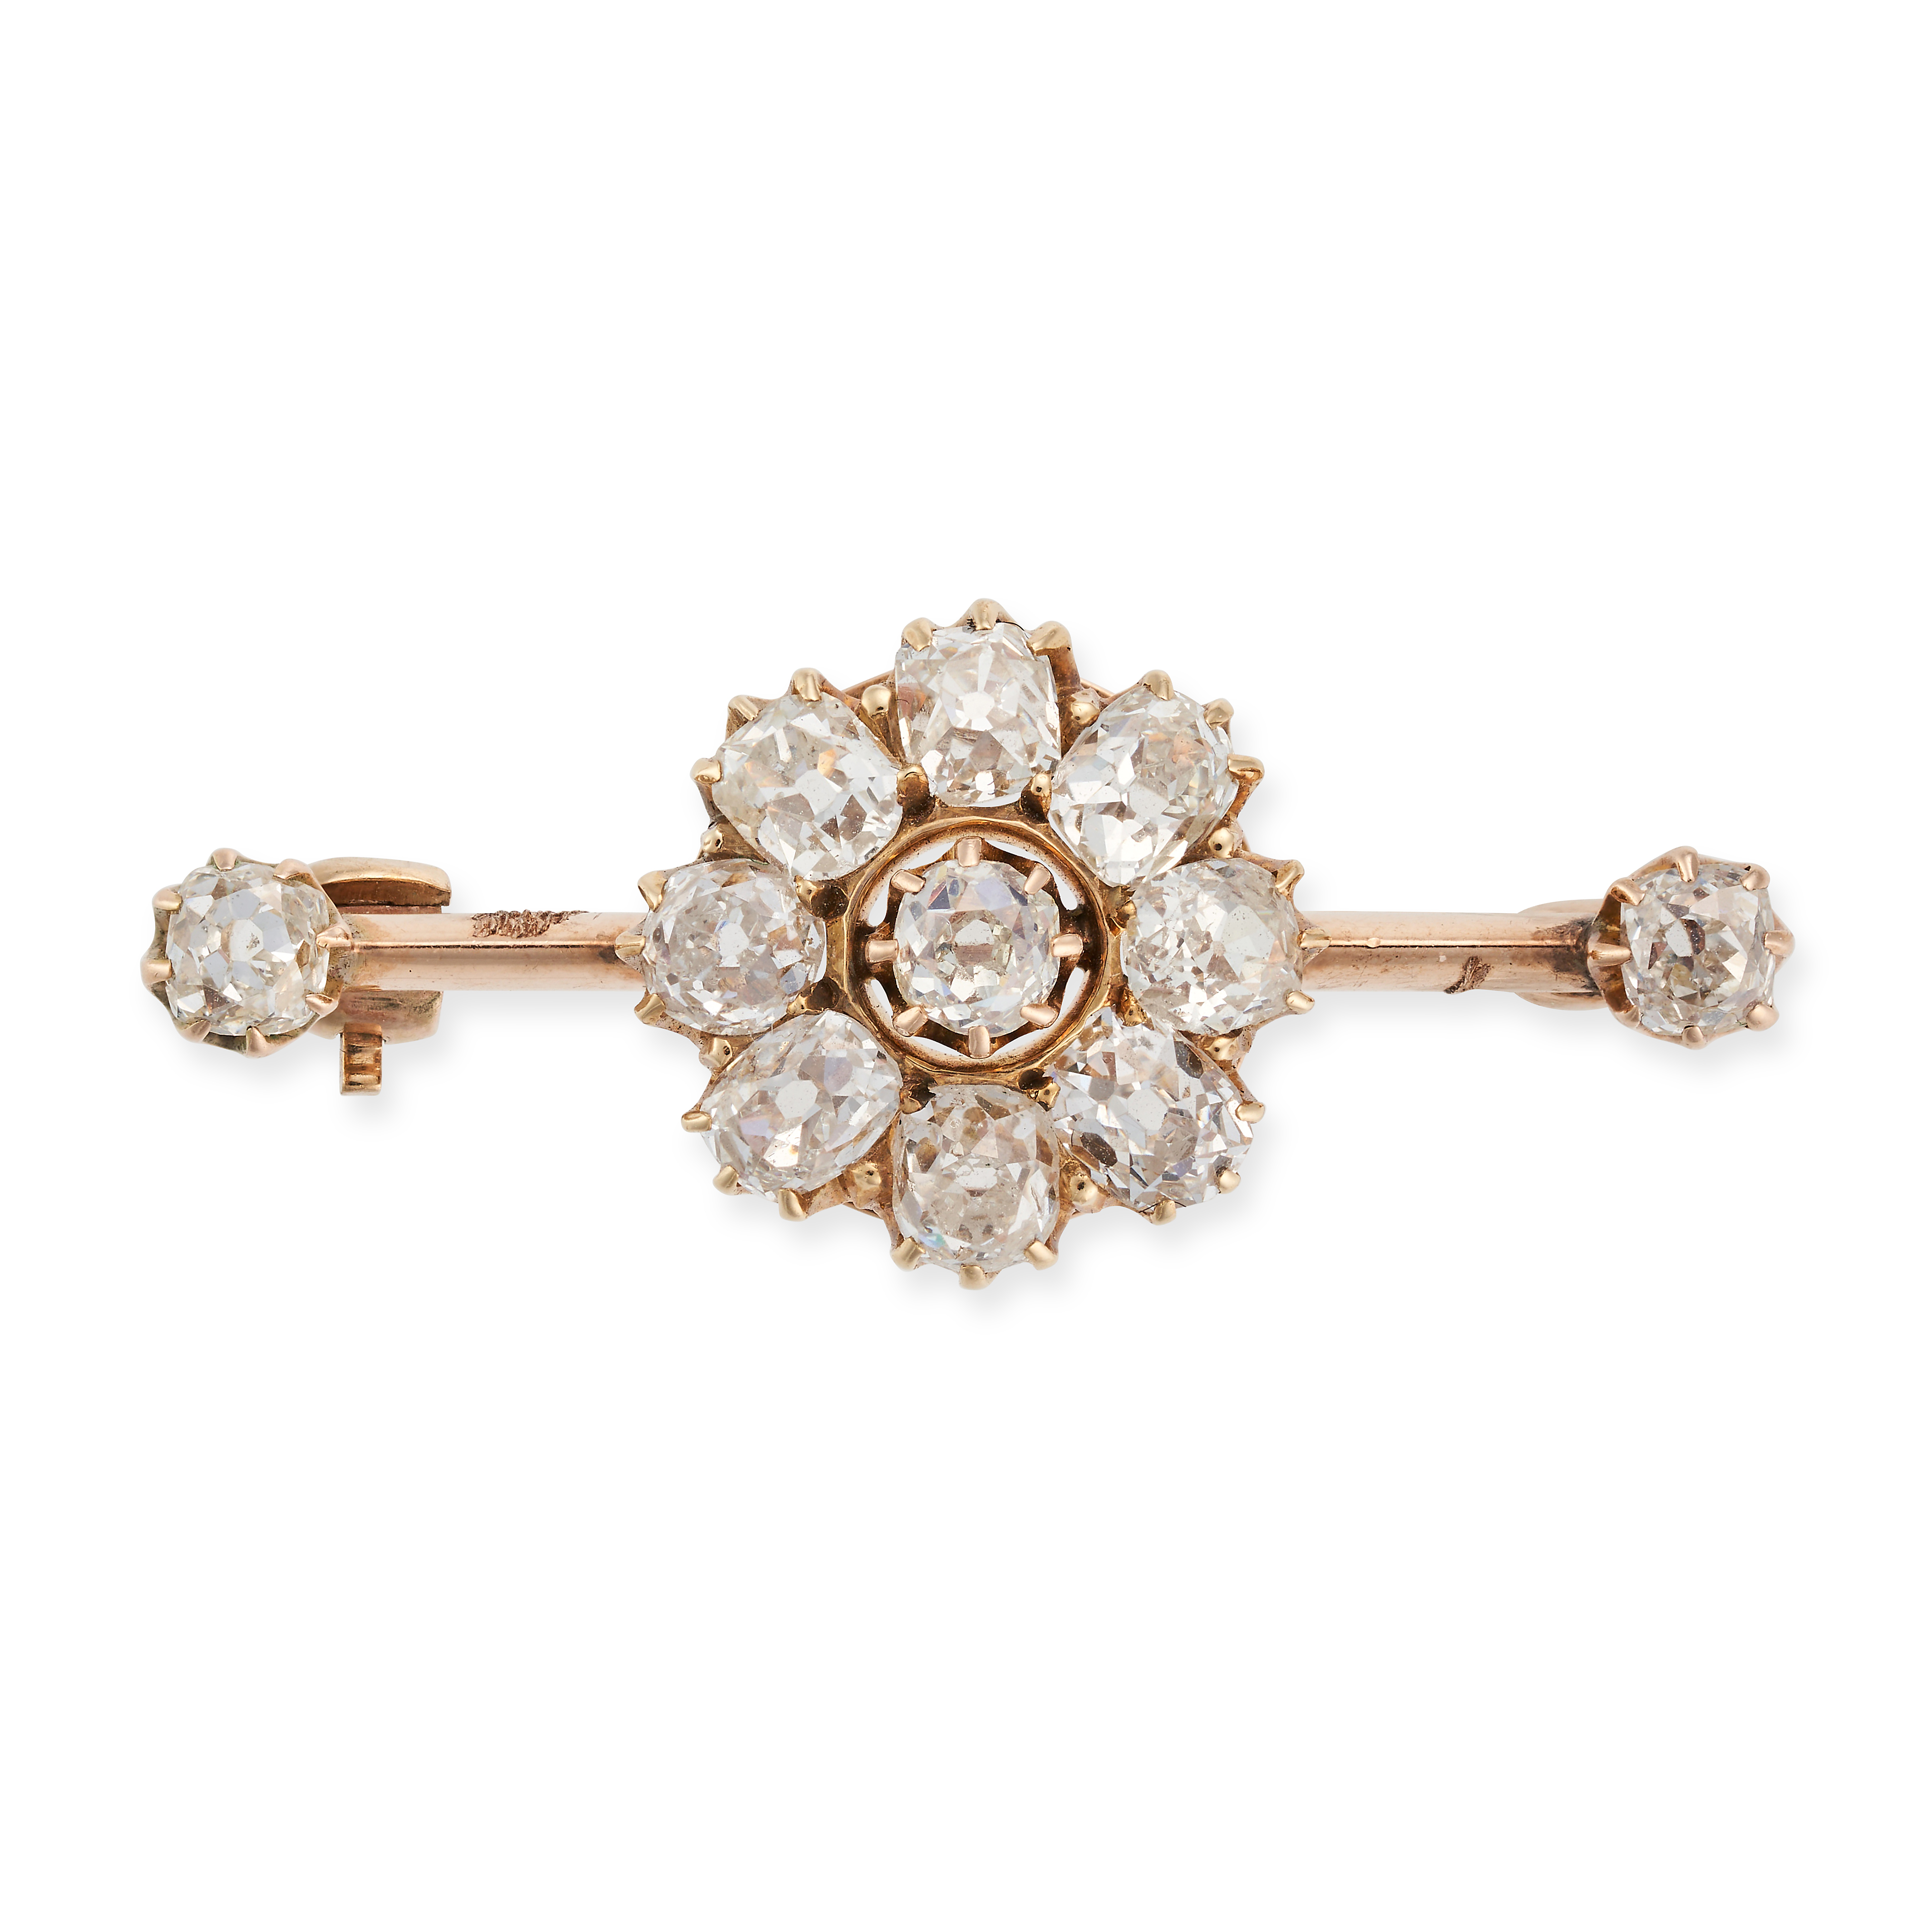 AN ANTIQUE DIAMOND CLUSTER BAR BROOCH in yellow gold, set with a cluster of old cut diamonds, eac...